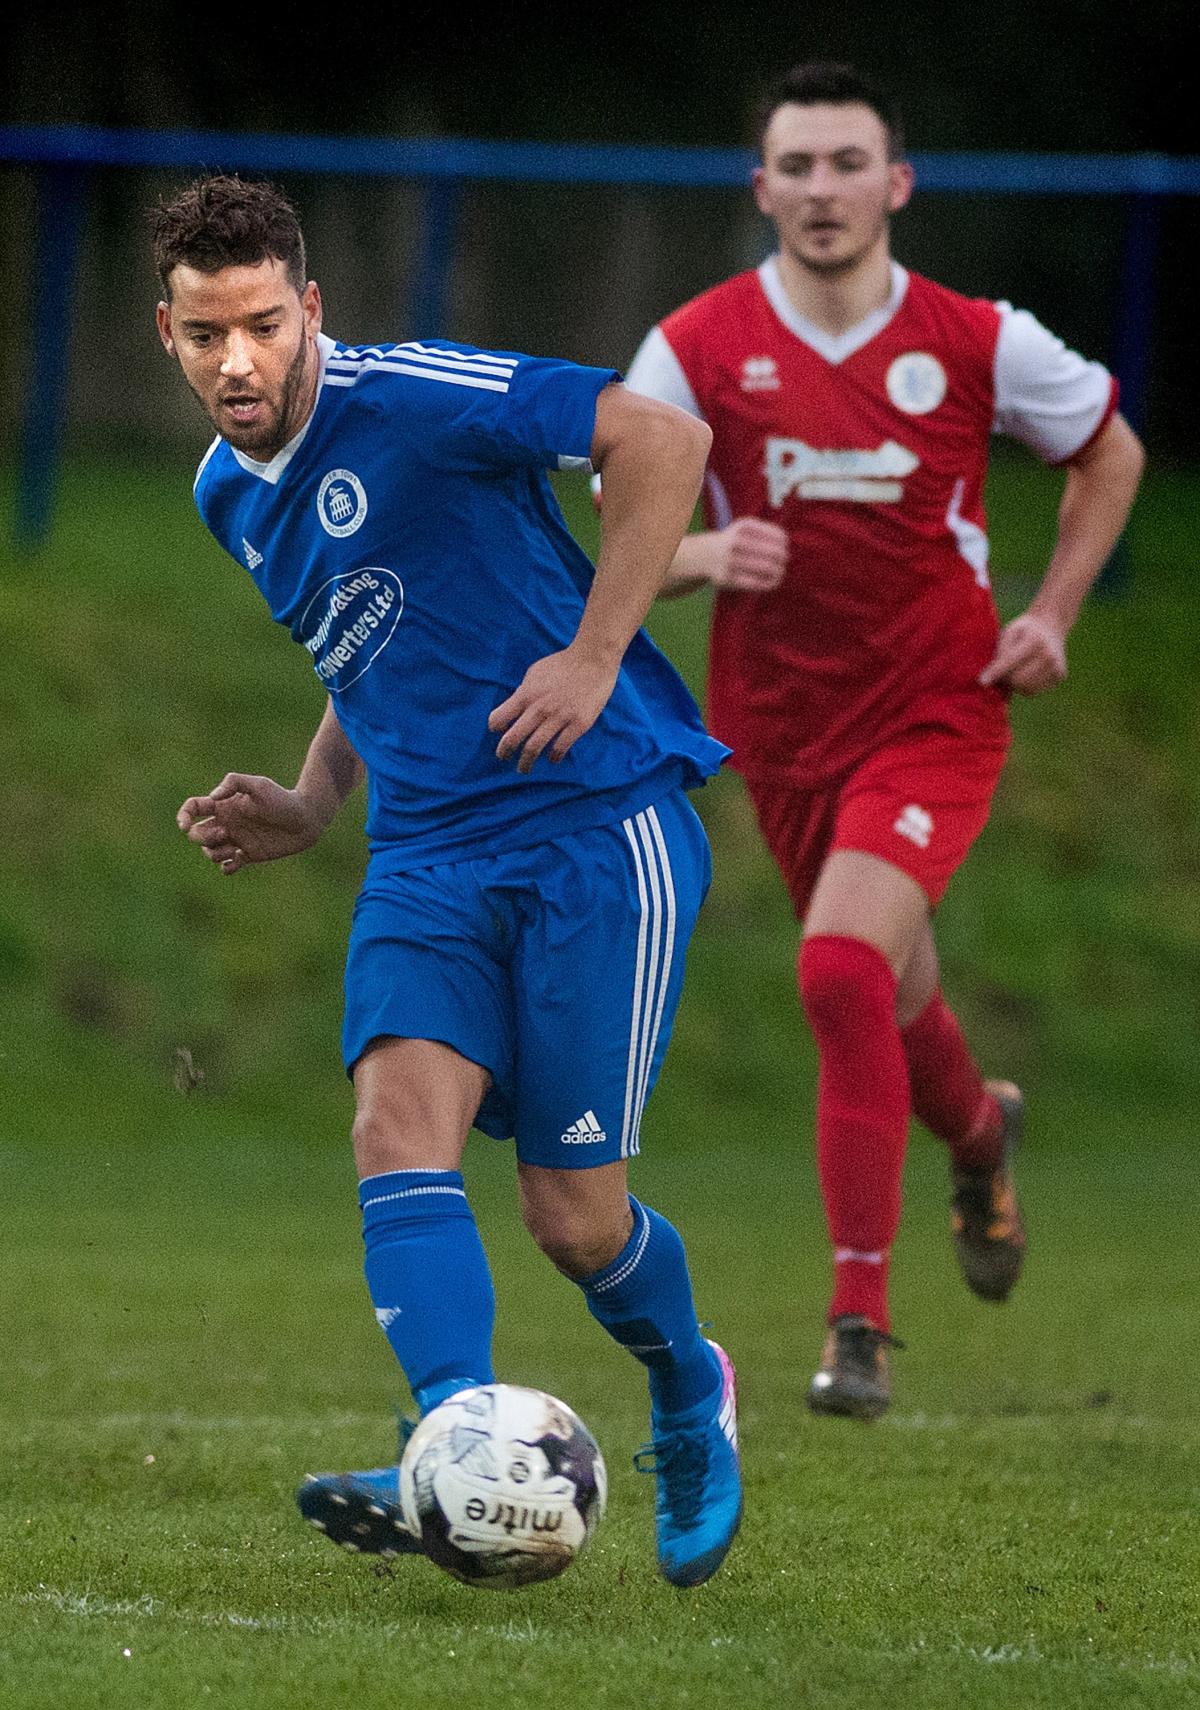 Andover Town's newbie Victor Guitierrez in action against Fawley in Town's 3-1 win at the Portway - Picture Andy Brooks